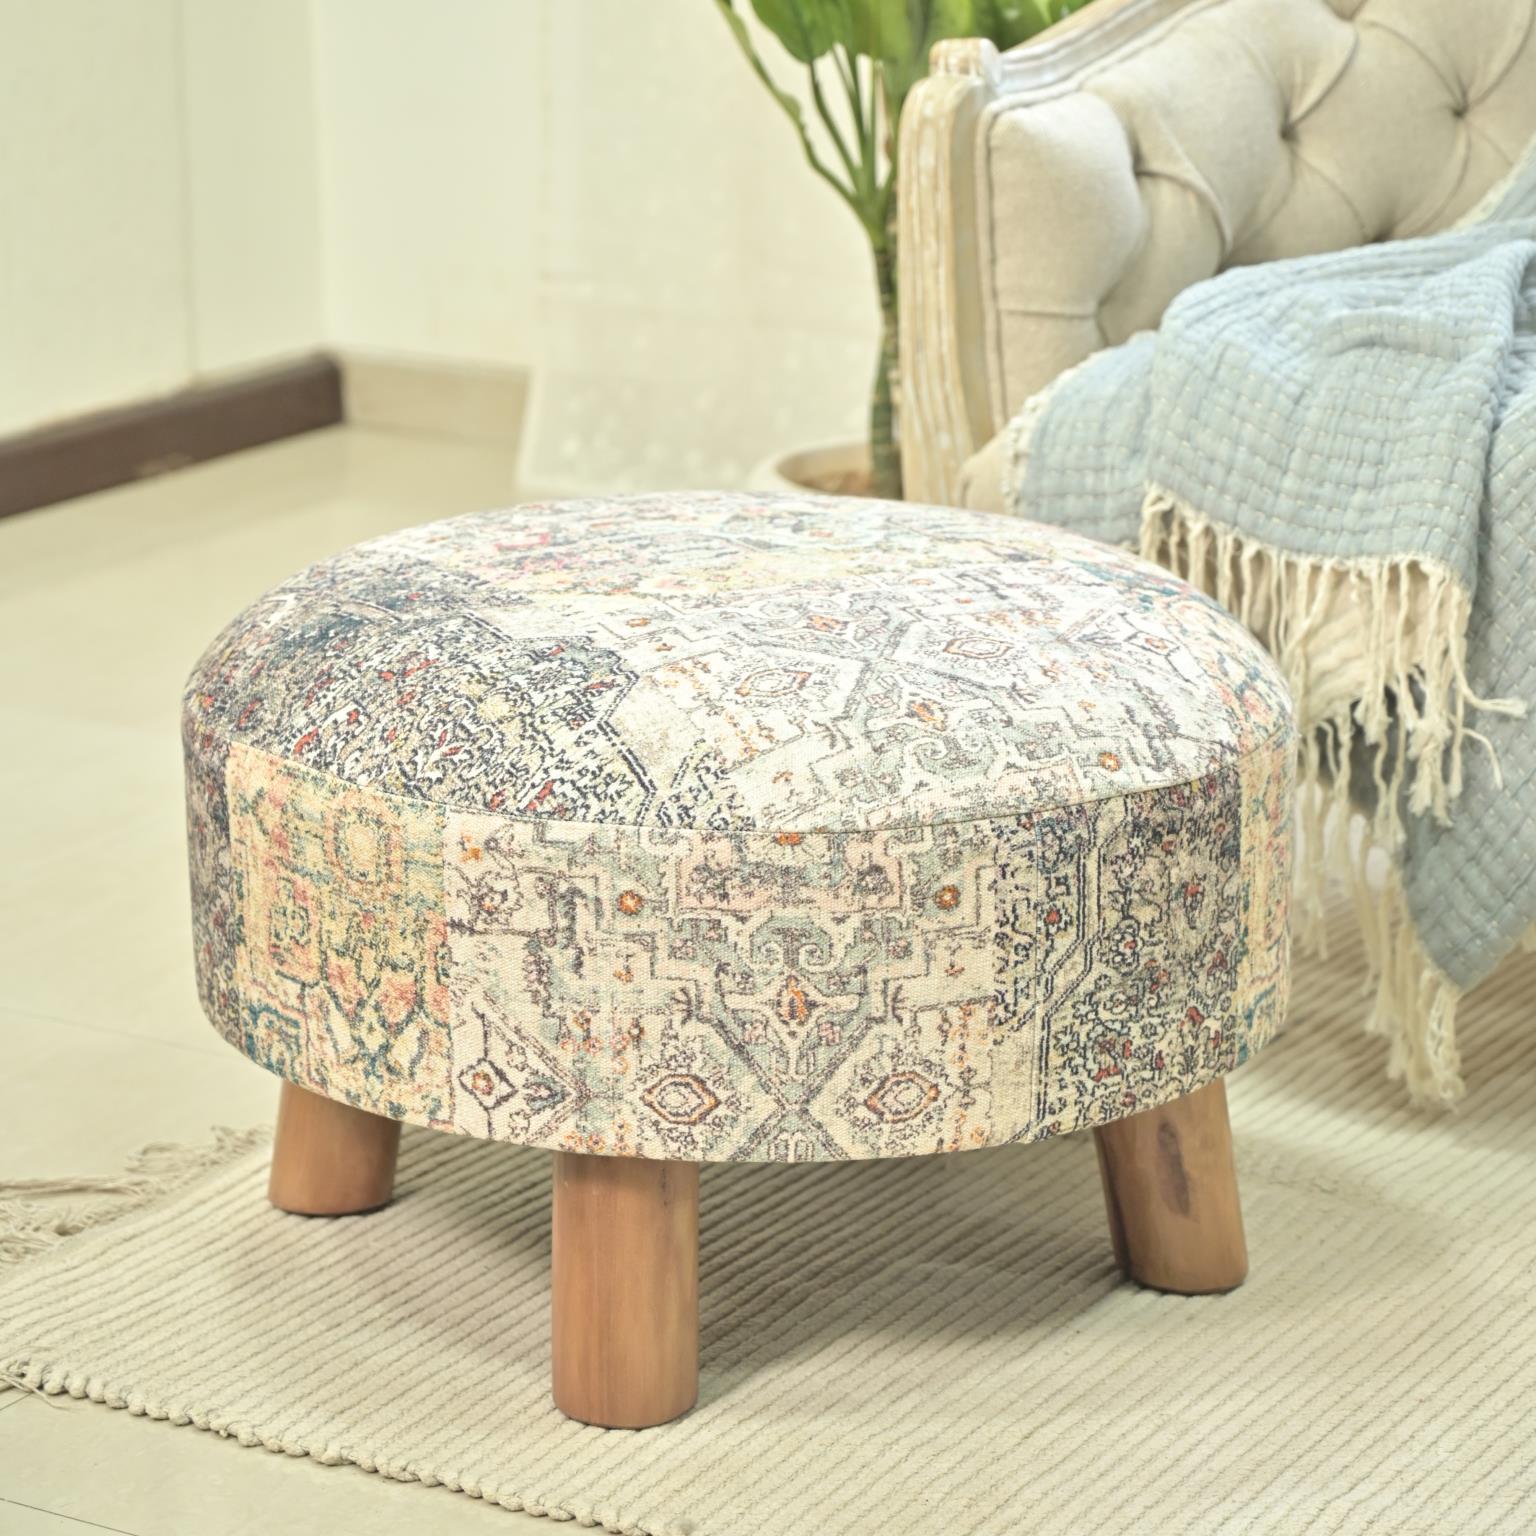 Modern, Traditional Stool 1524 Stool 718852652369 718852652369 in Beige Fabric